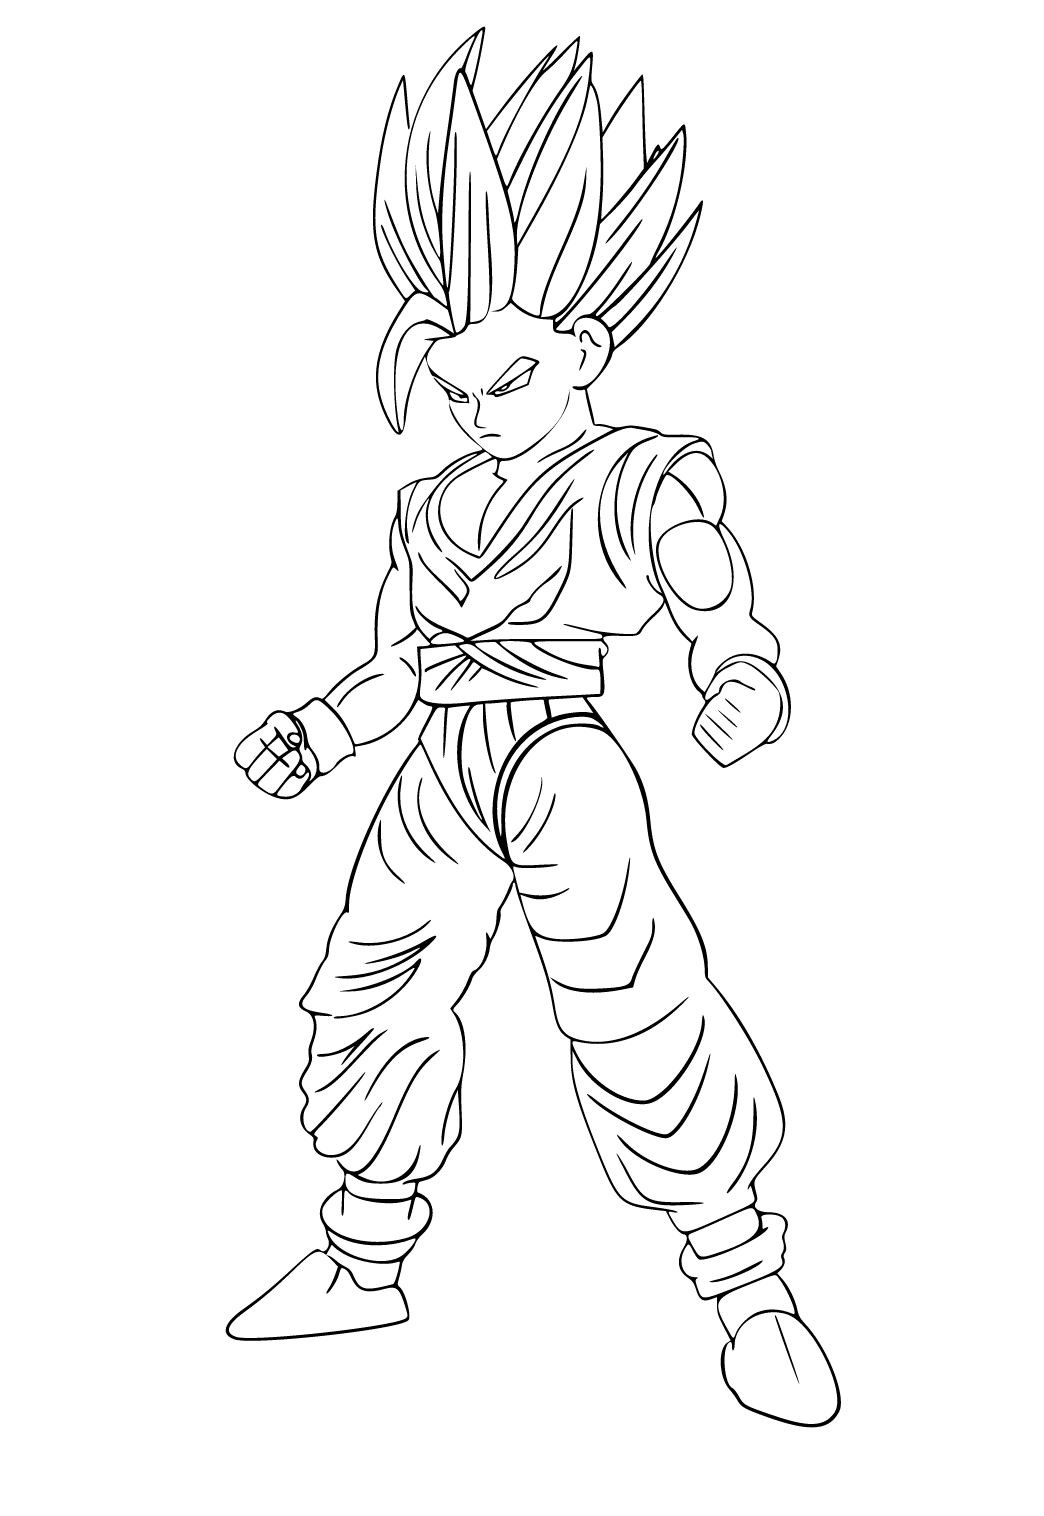 Black Goku Coloring Pages - Coloring Home